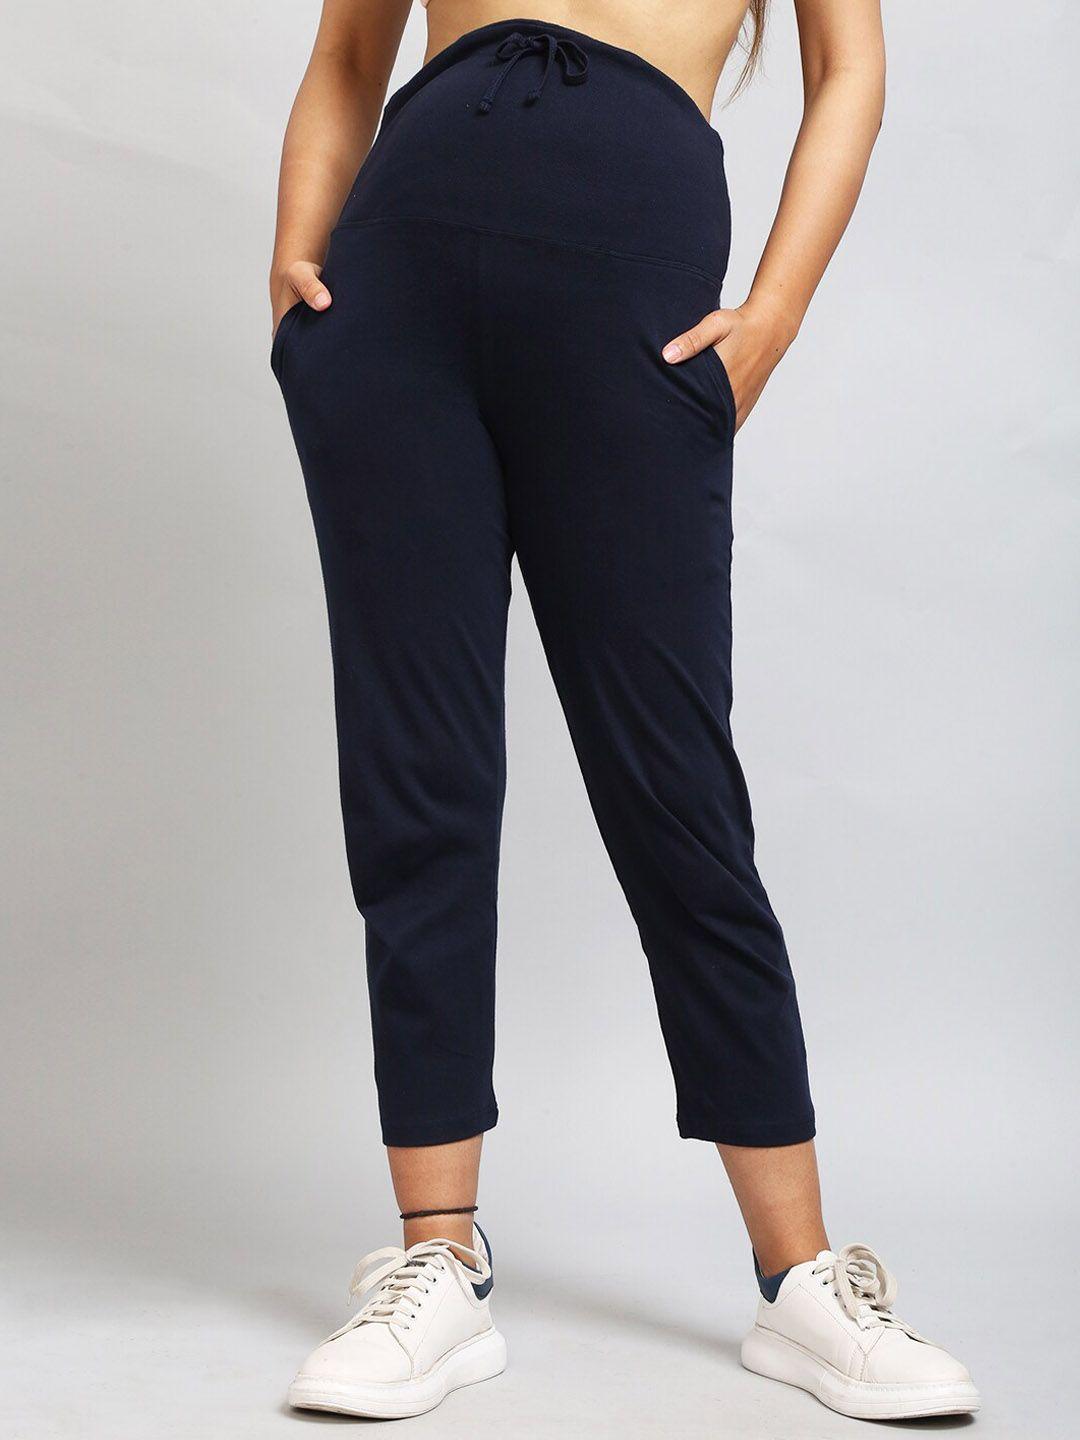 sillyboom women navy blue solid ankle length cropped maternity leggings